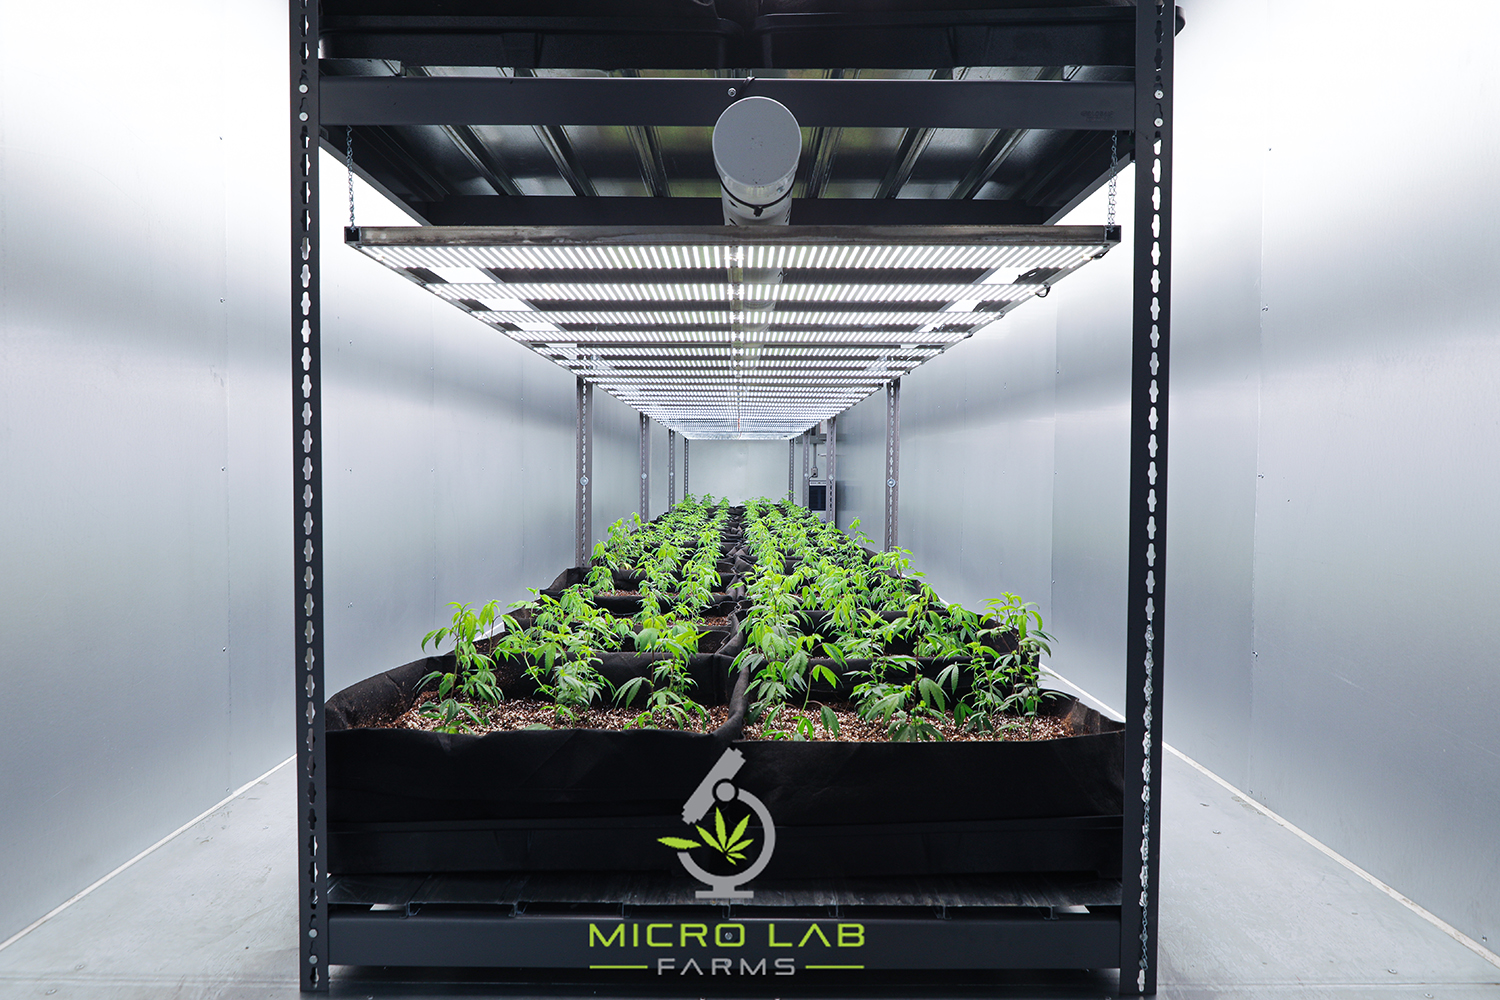 Supporting the Increase in Consumption with Indoor Farming